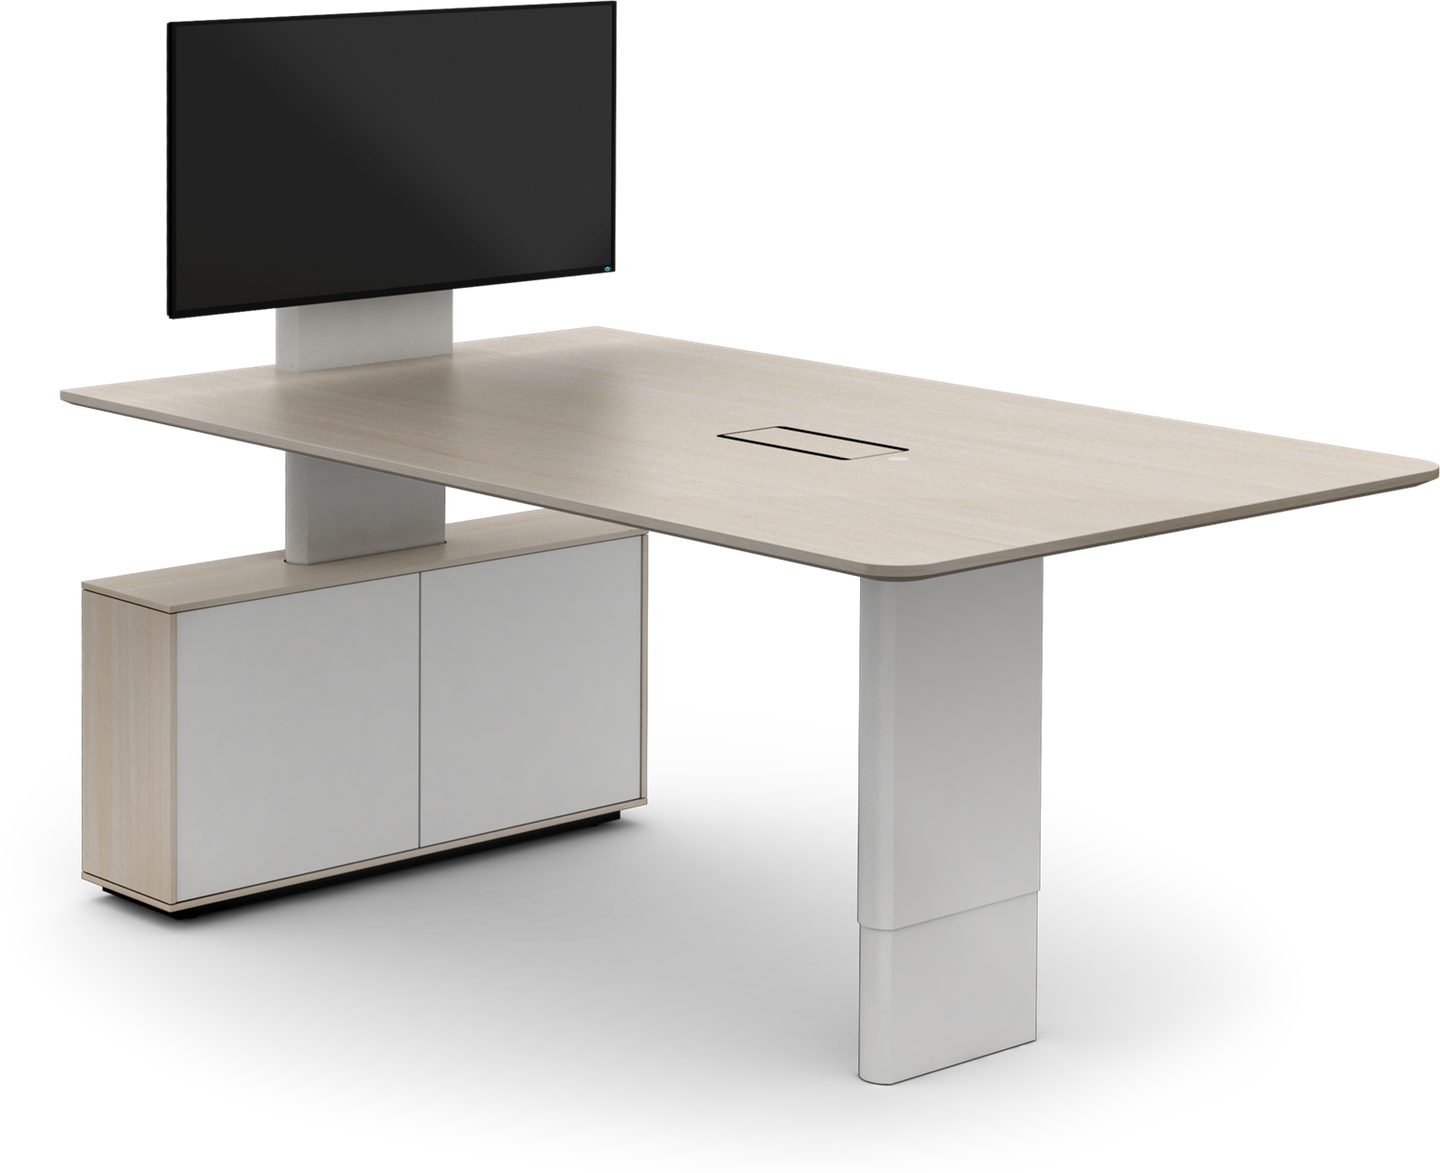 Desk PNG High Quality Image | PNG All